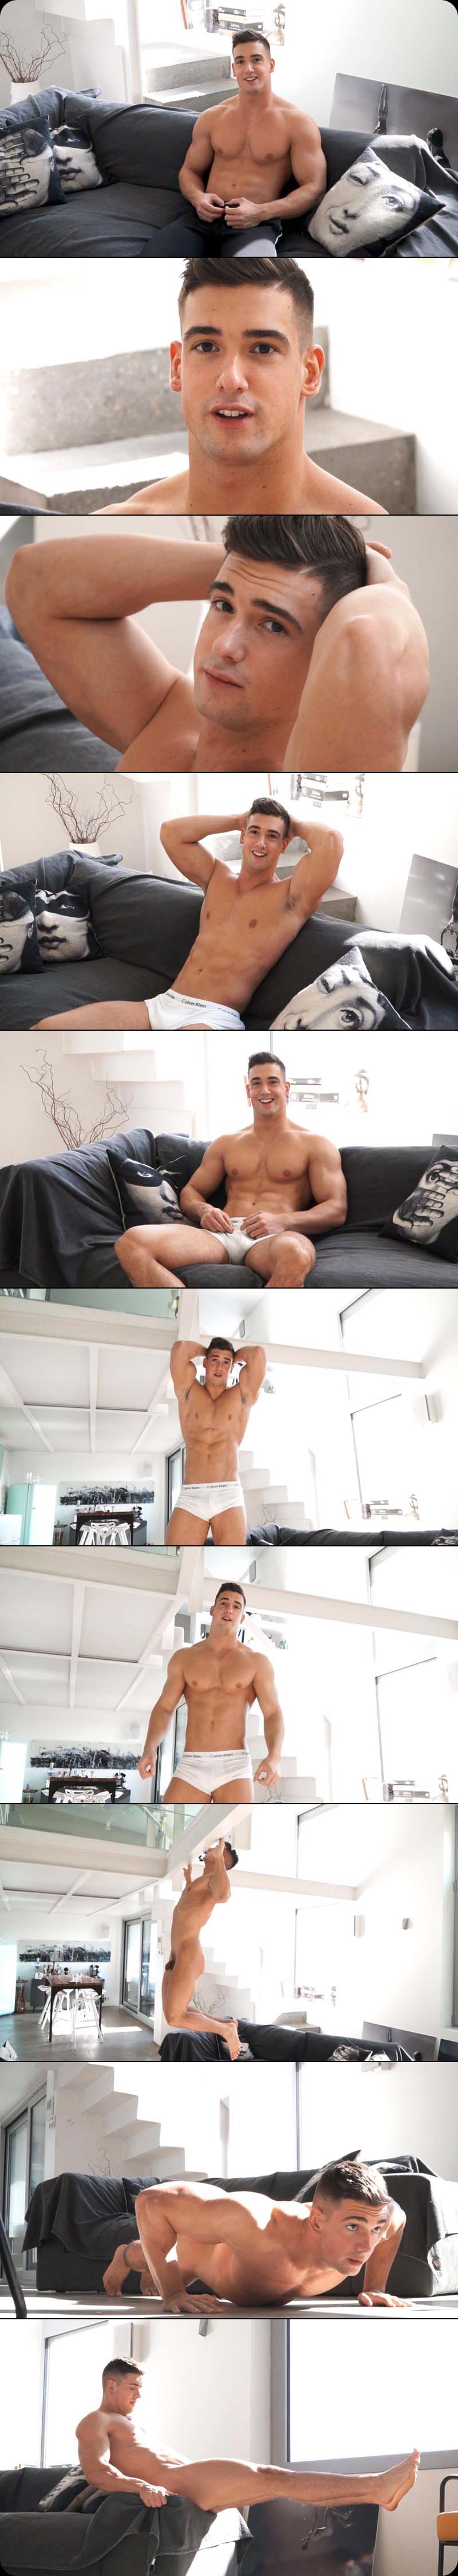 Niccolo Neri [Interview+Solo] at BelAmiOnline.com